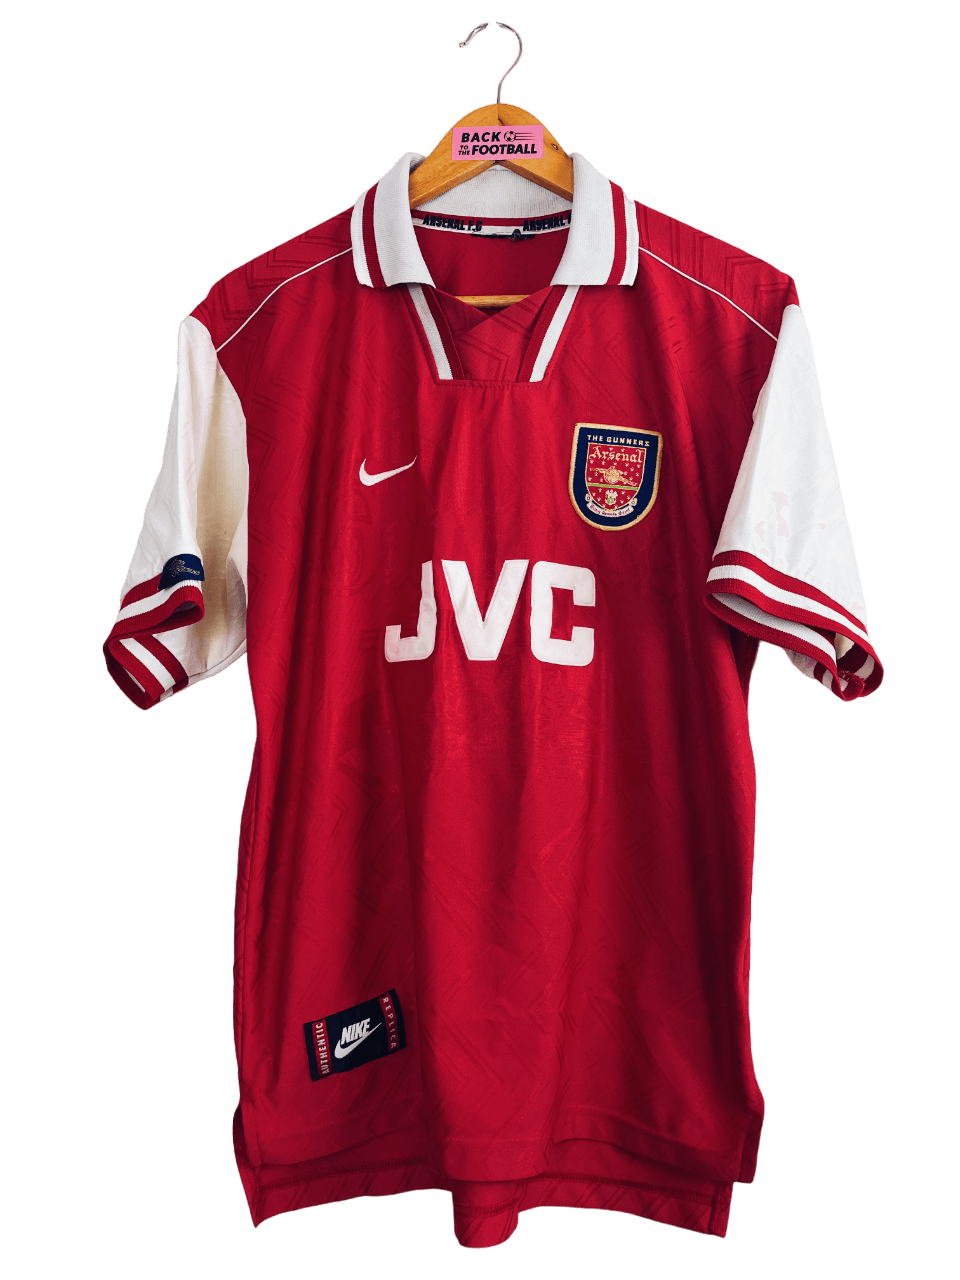 Maillot vintage 1996 / 1997 - Arsenal (M) - Back To The Football